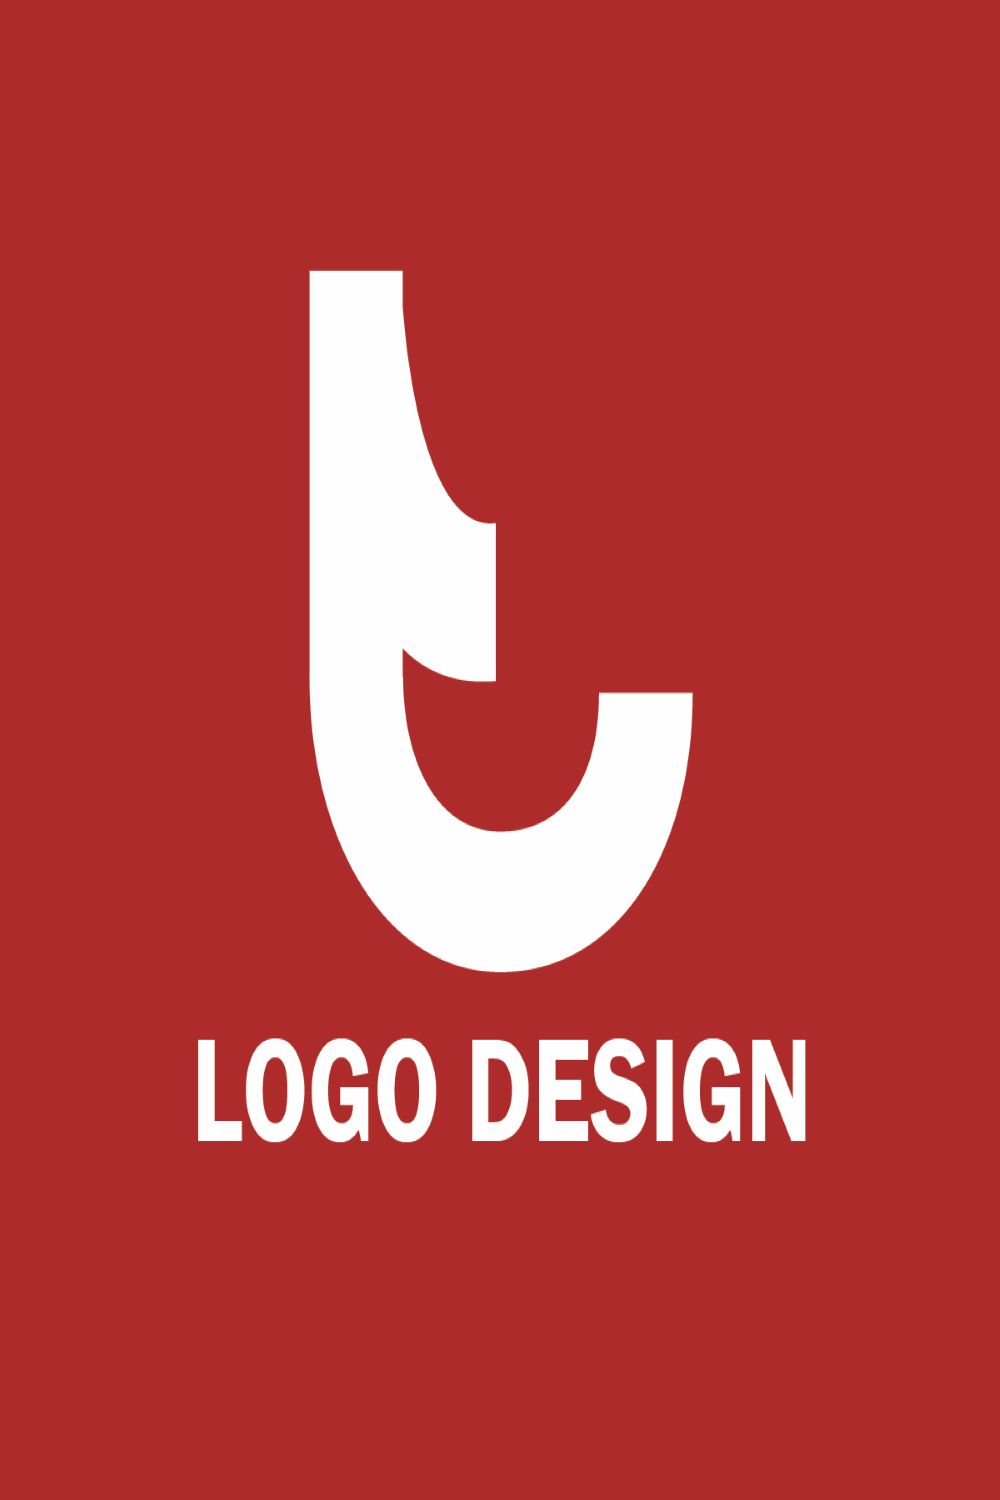 Minimalistic Logo Design Pinterest Collage image with red background.